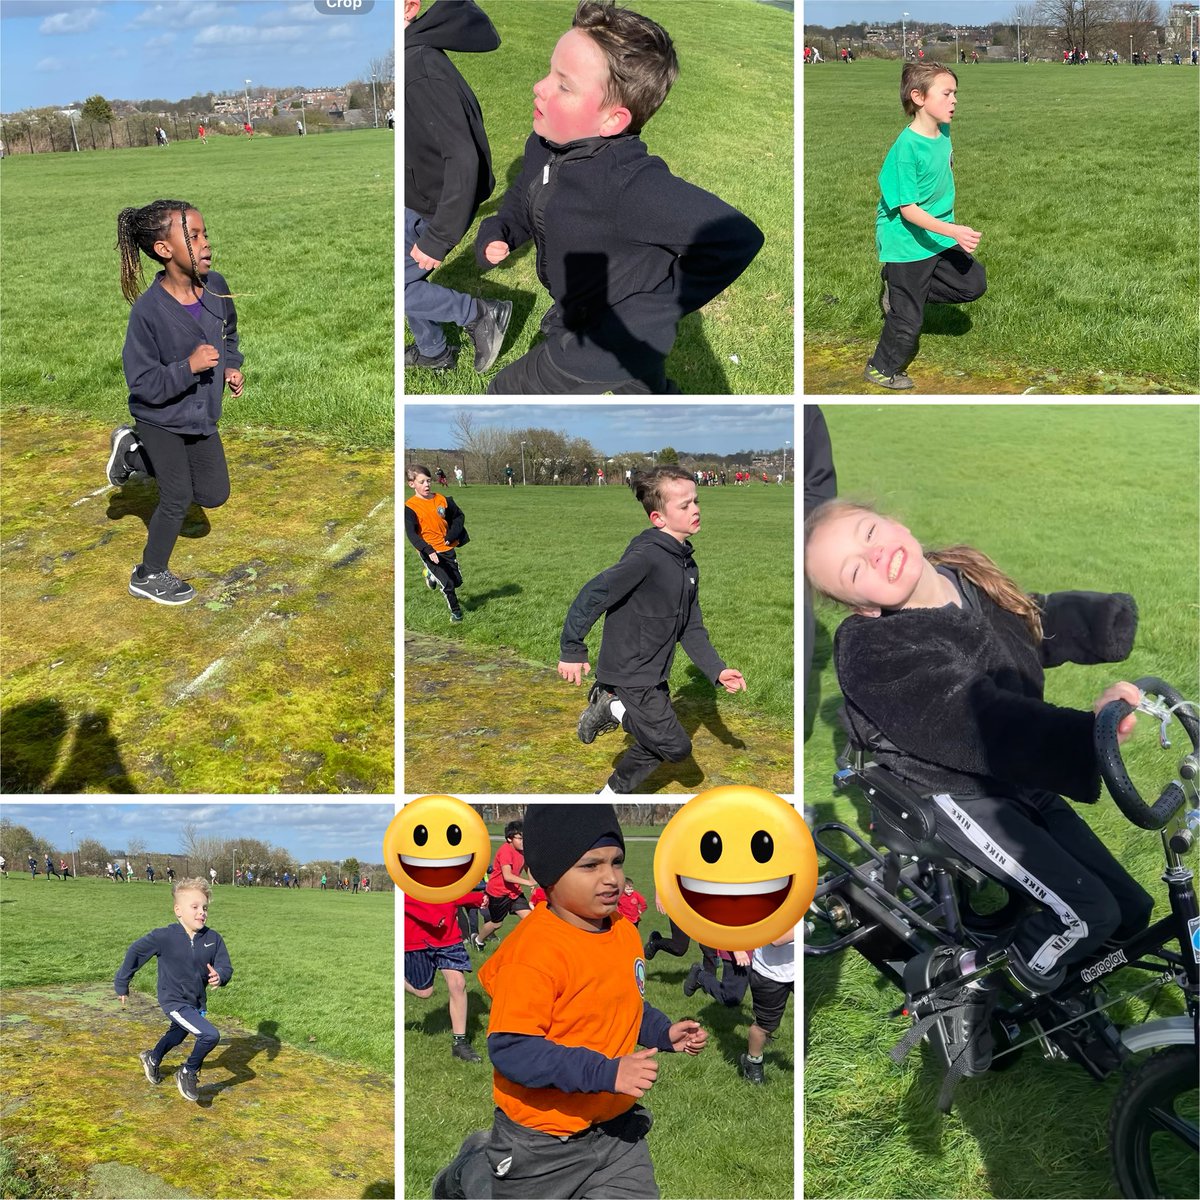 Finishing the half term with some cross country fun🏃@WCPSc2026 @WCPSc2027